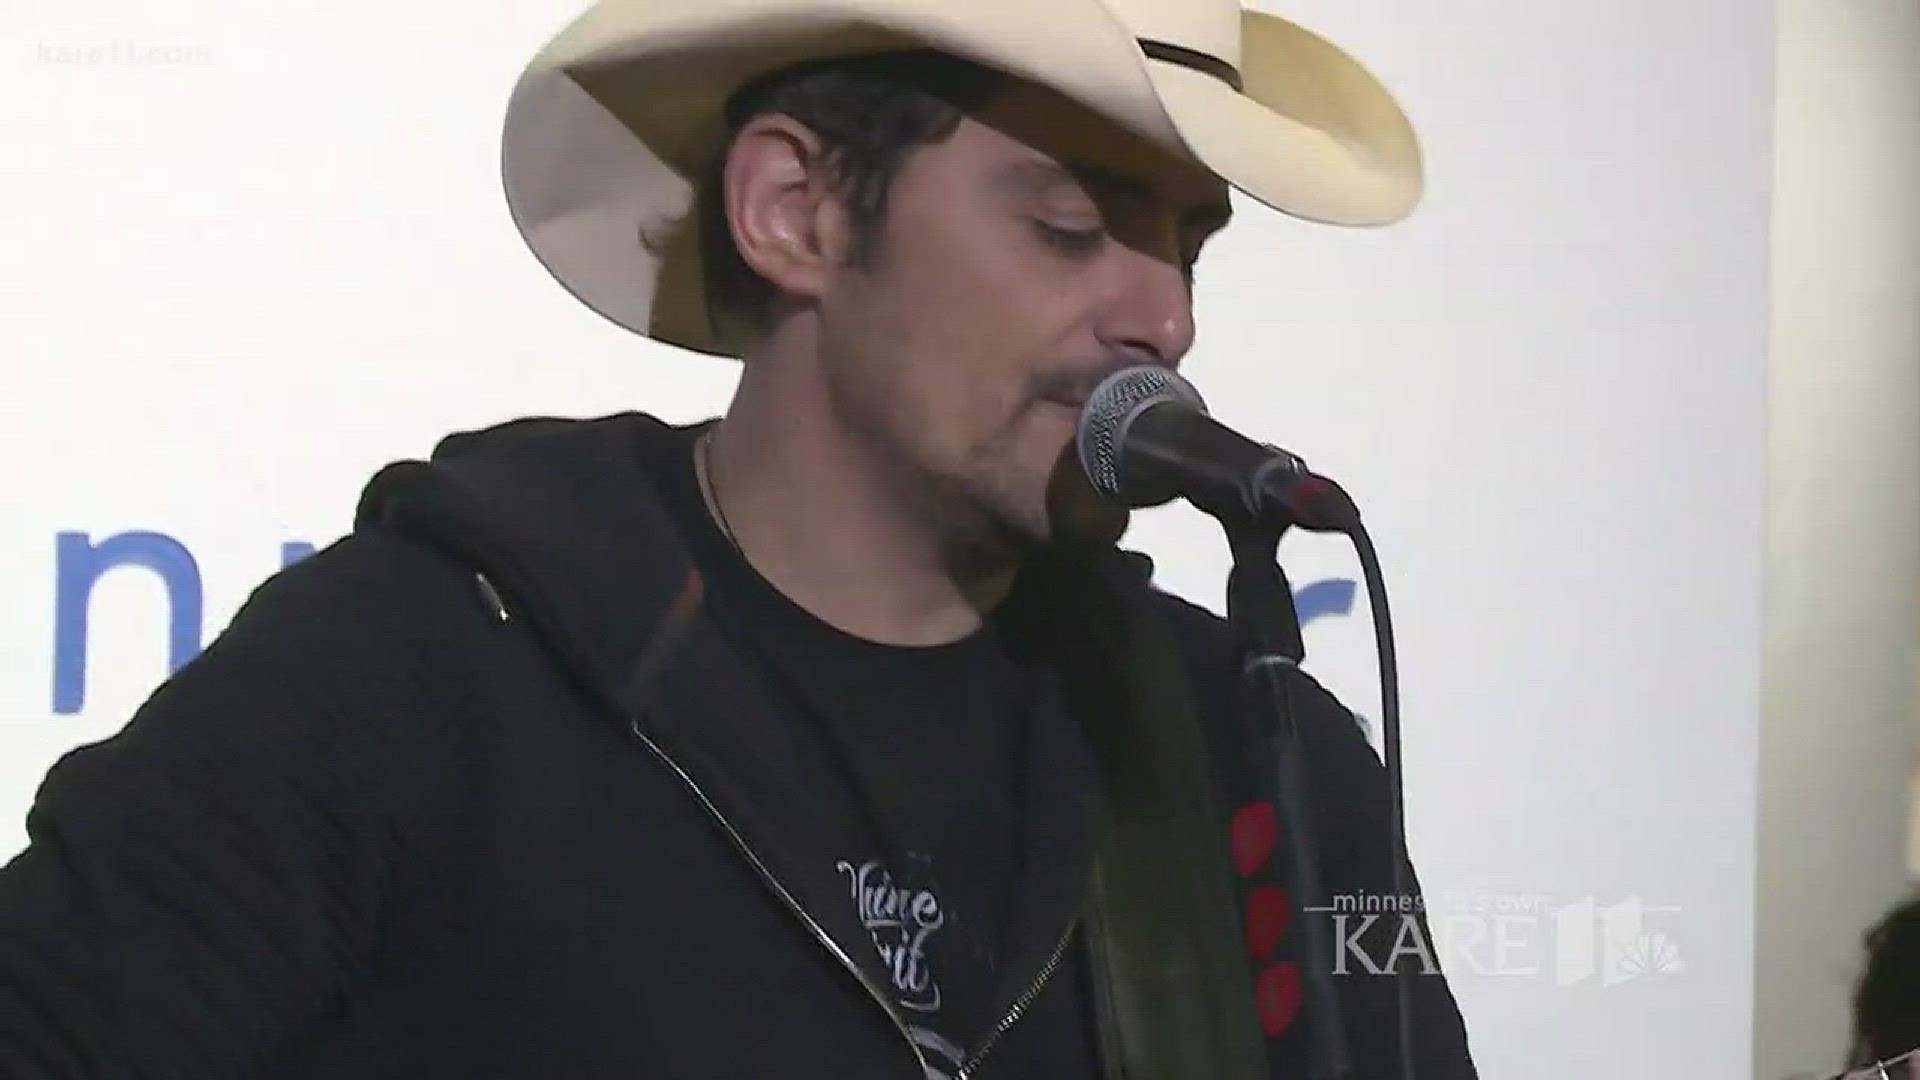 Brad Paisley surprised Minnesota fans with a free pop-up show at the Mall of America Tuesday. http://kare11.tv/2nkI8Ta